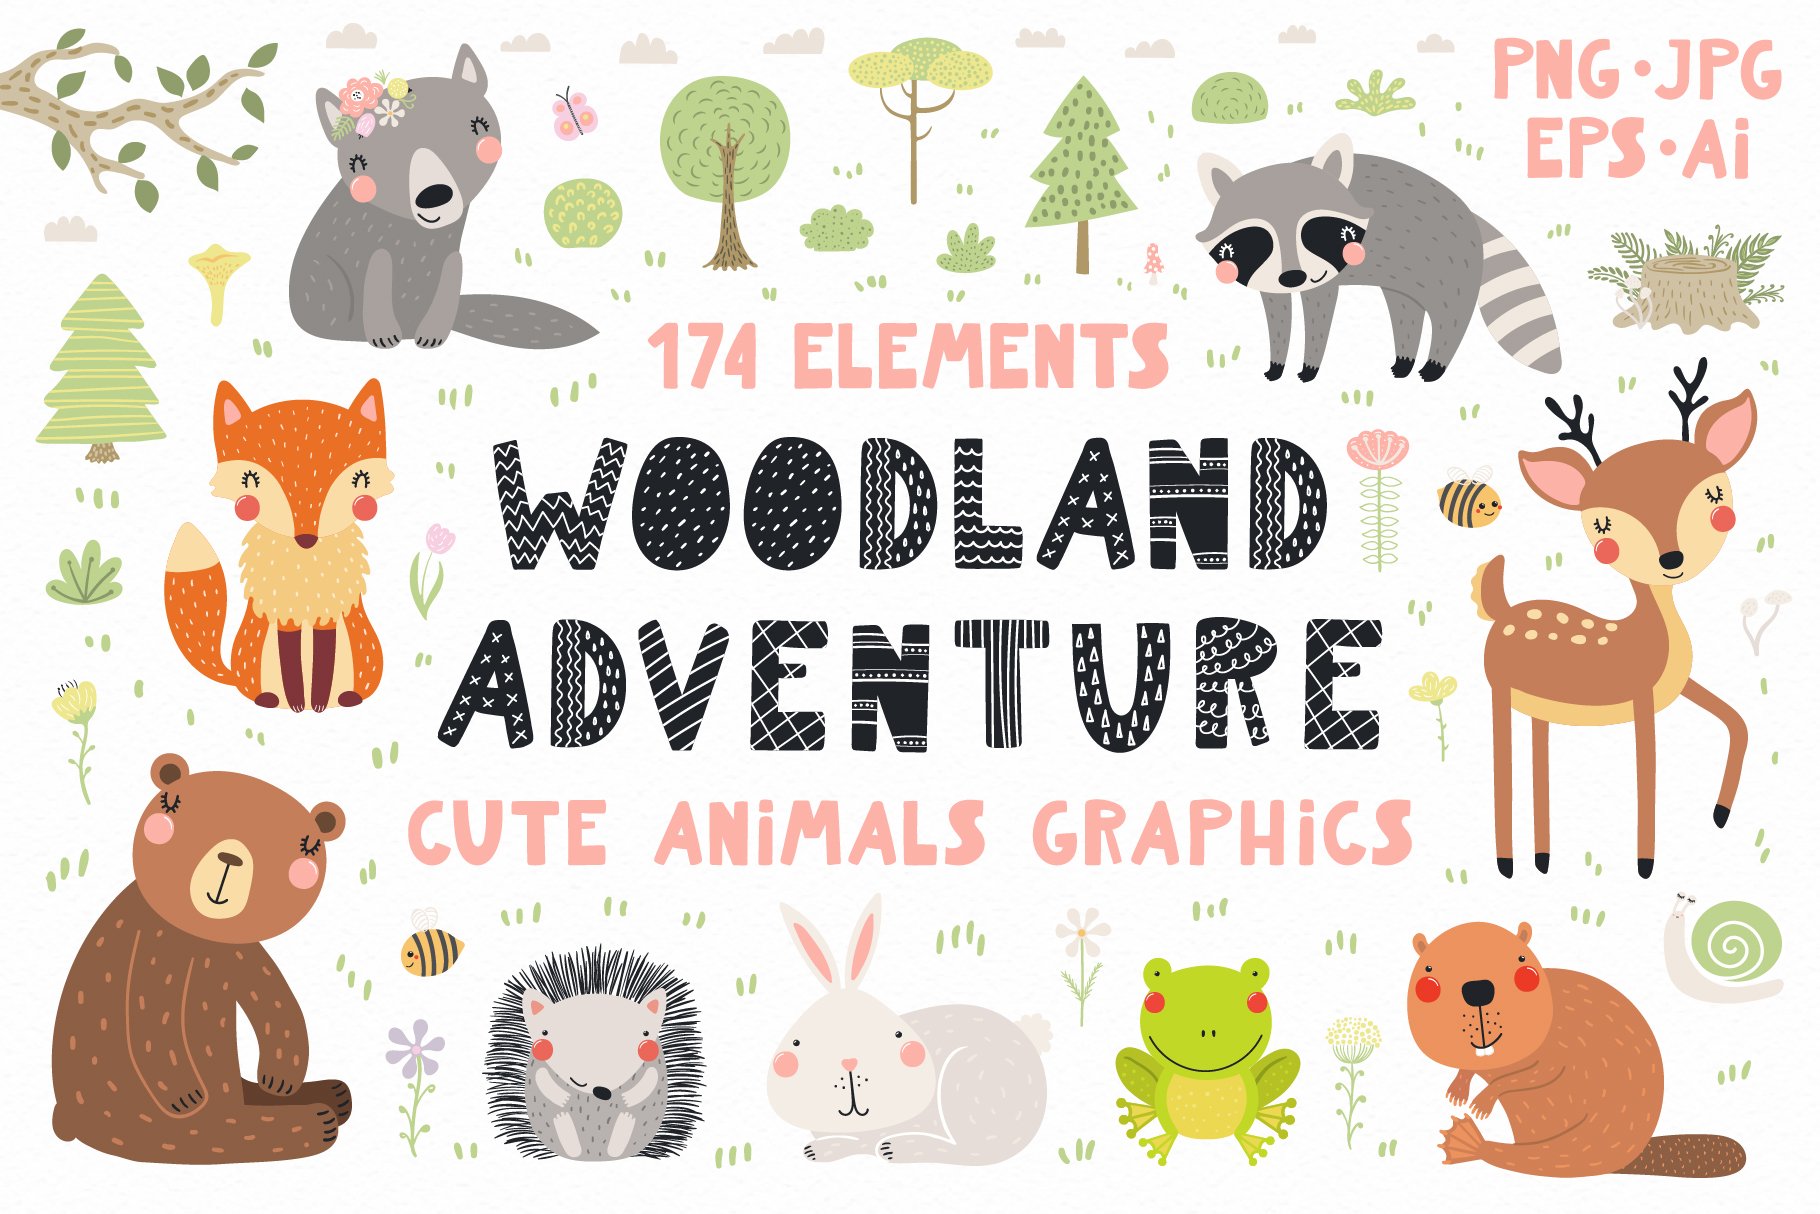 Cute Woodland Animals Art & Patterns cover image.